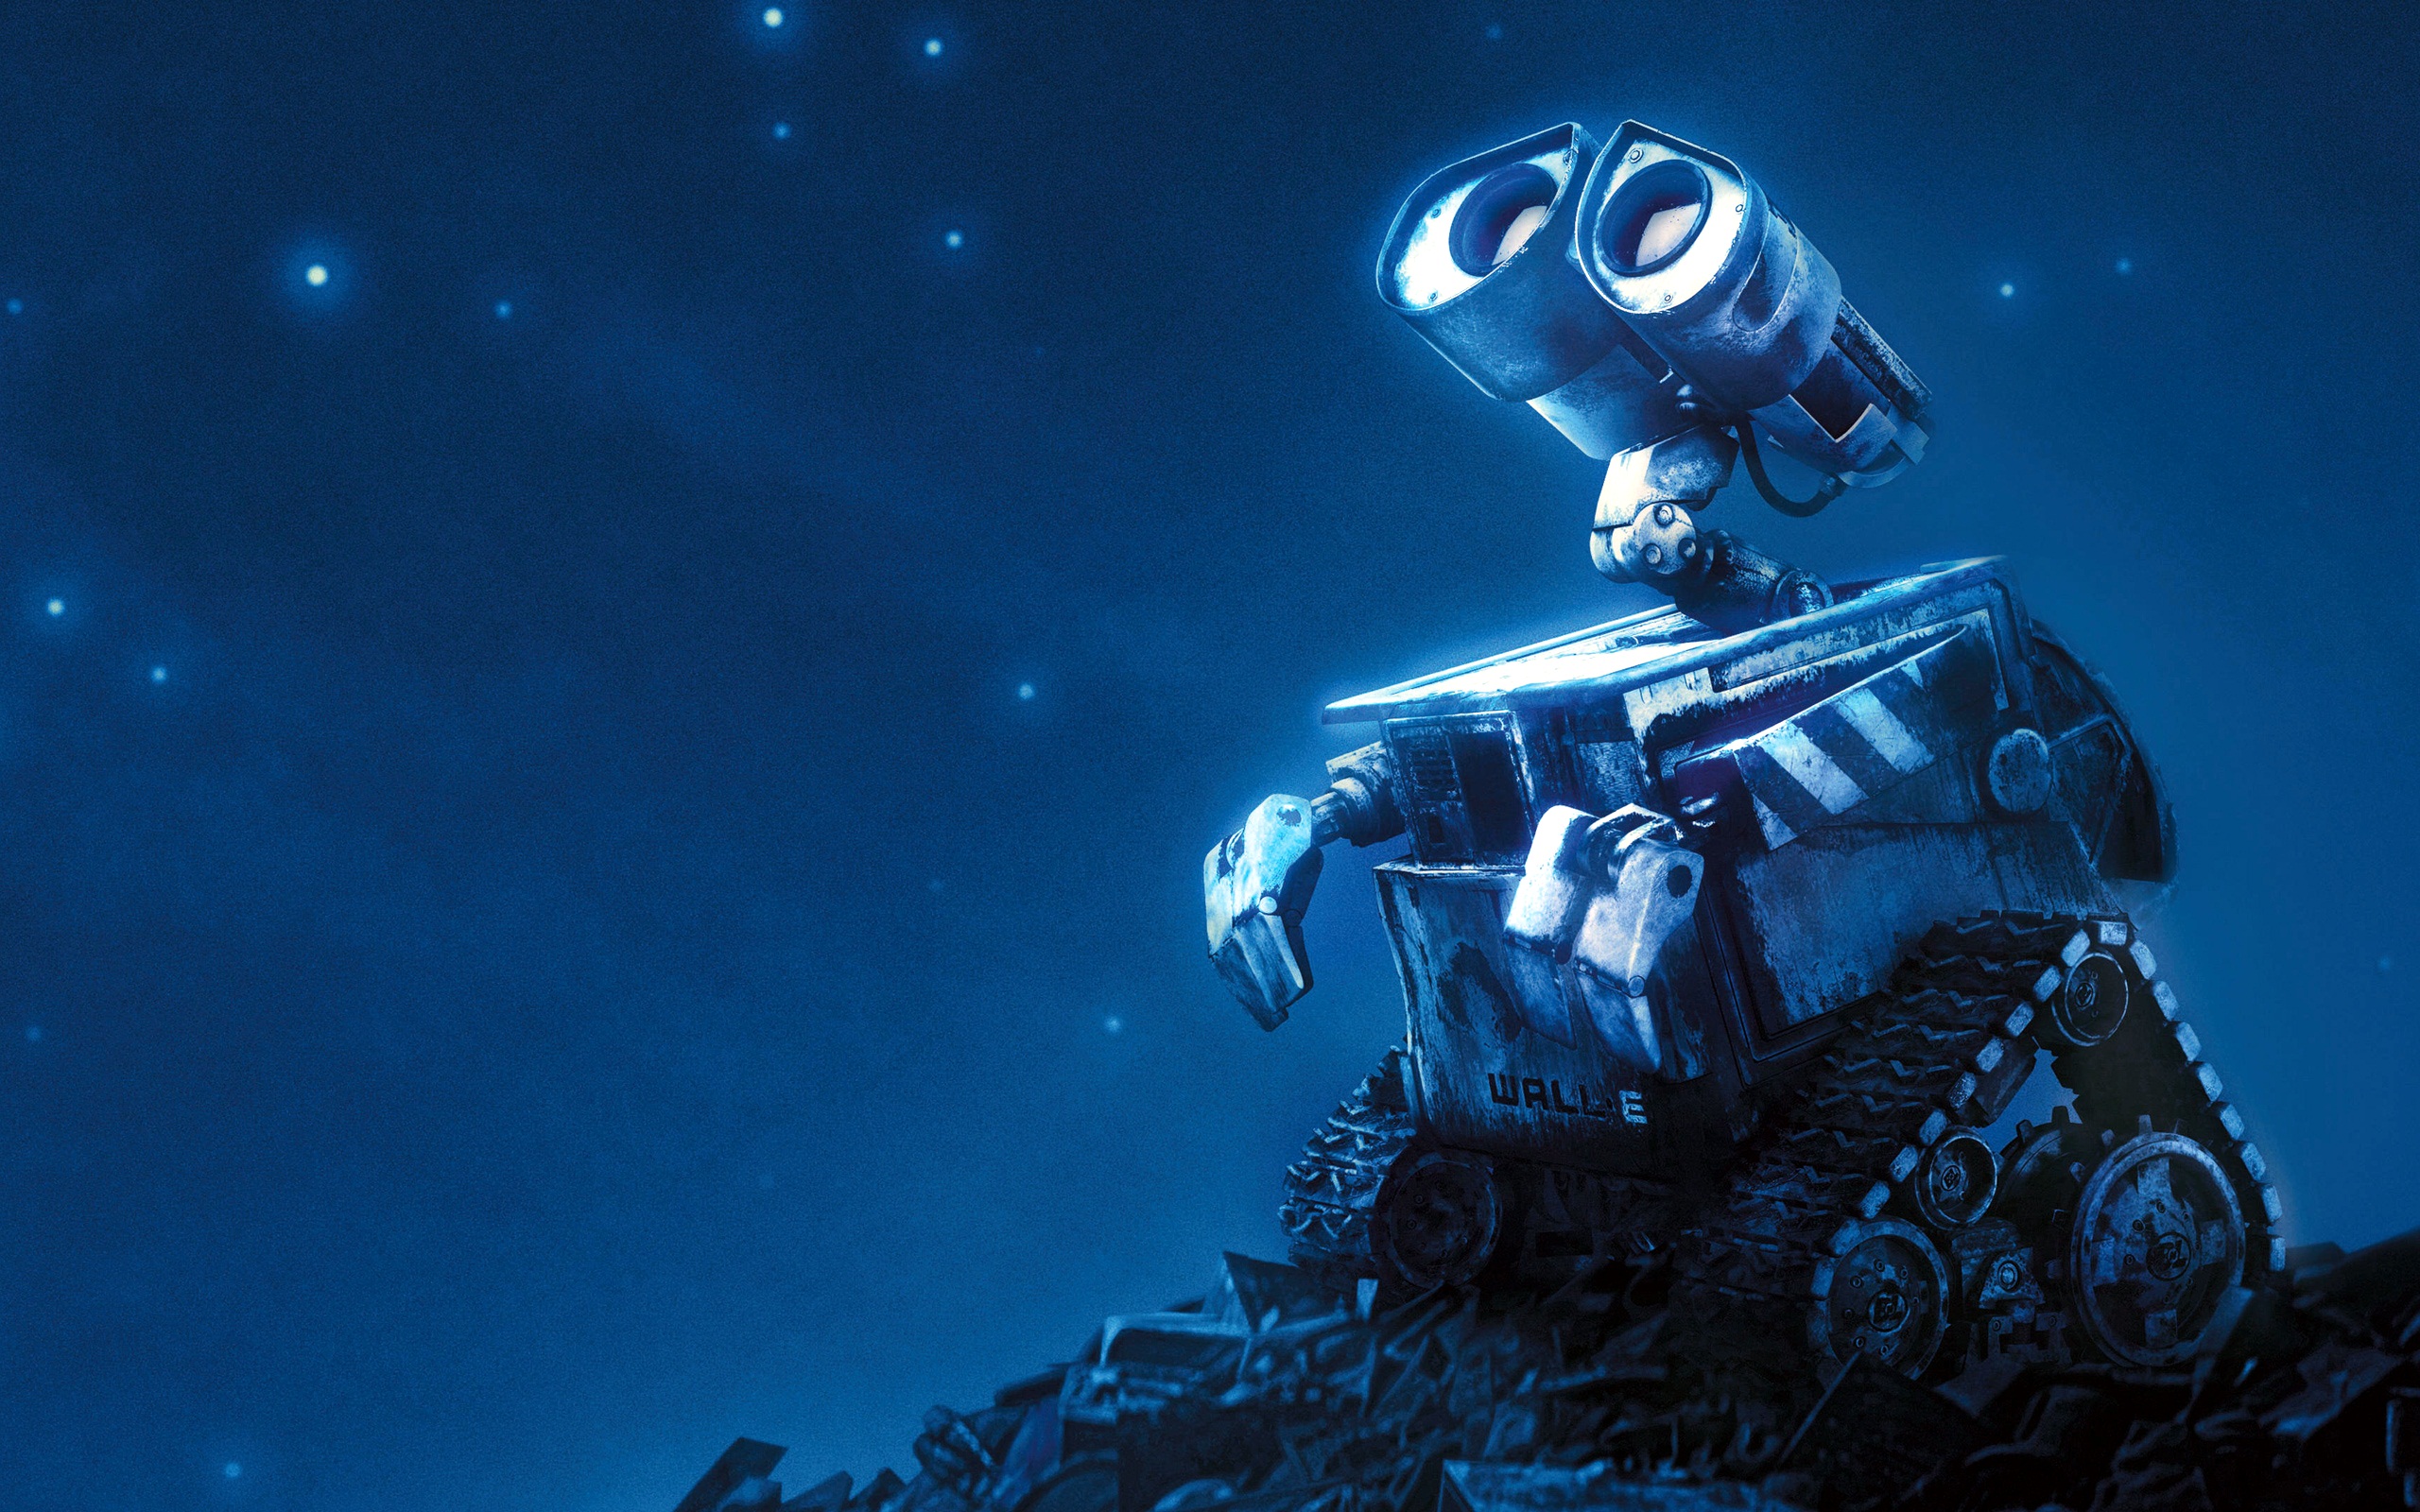 Wall E Image HD Wallpaper And Background Photos